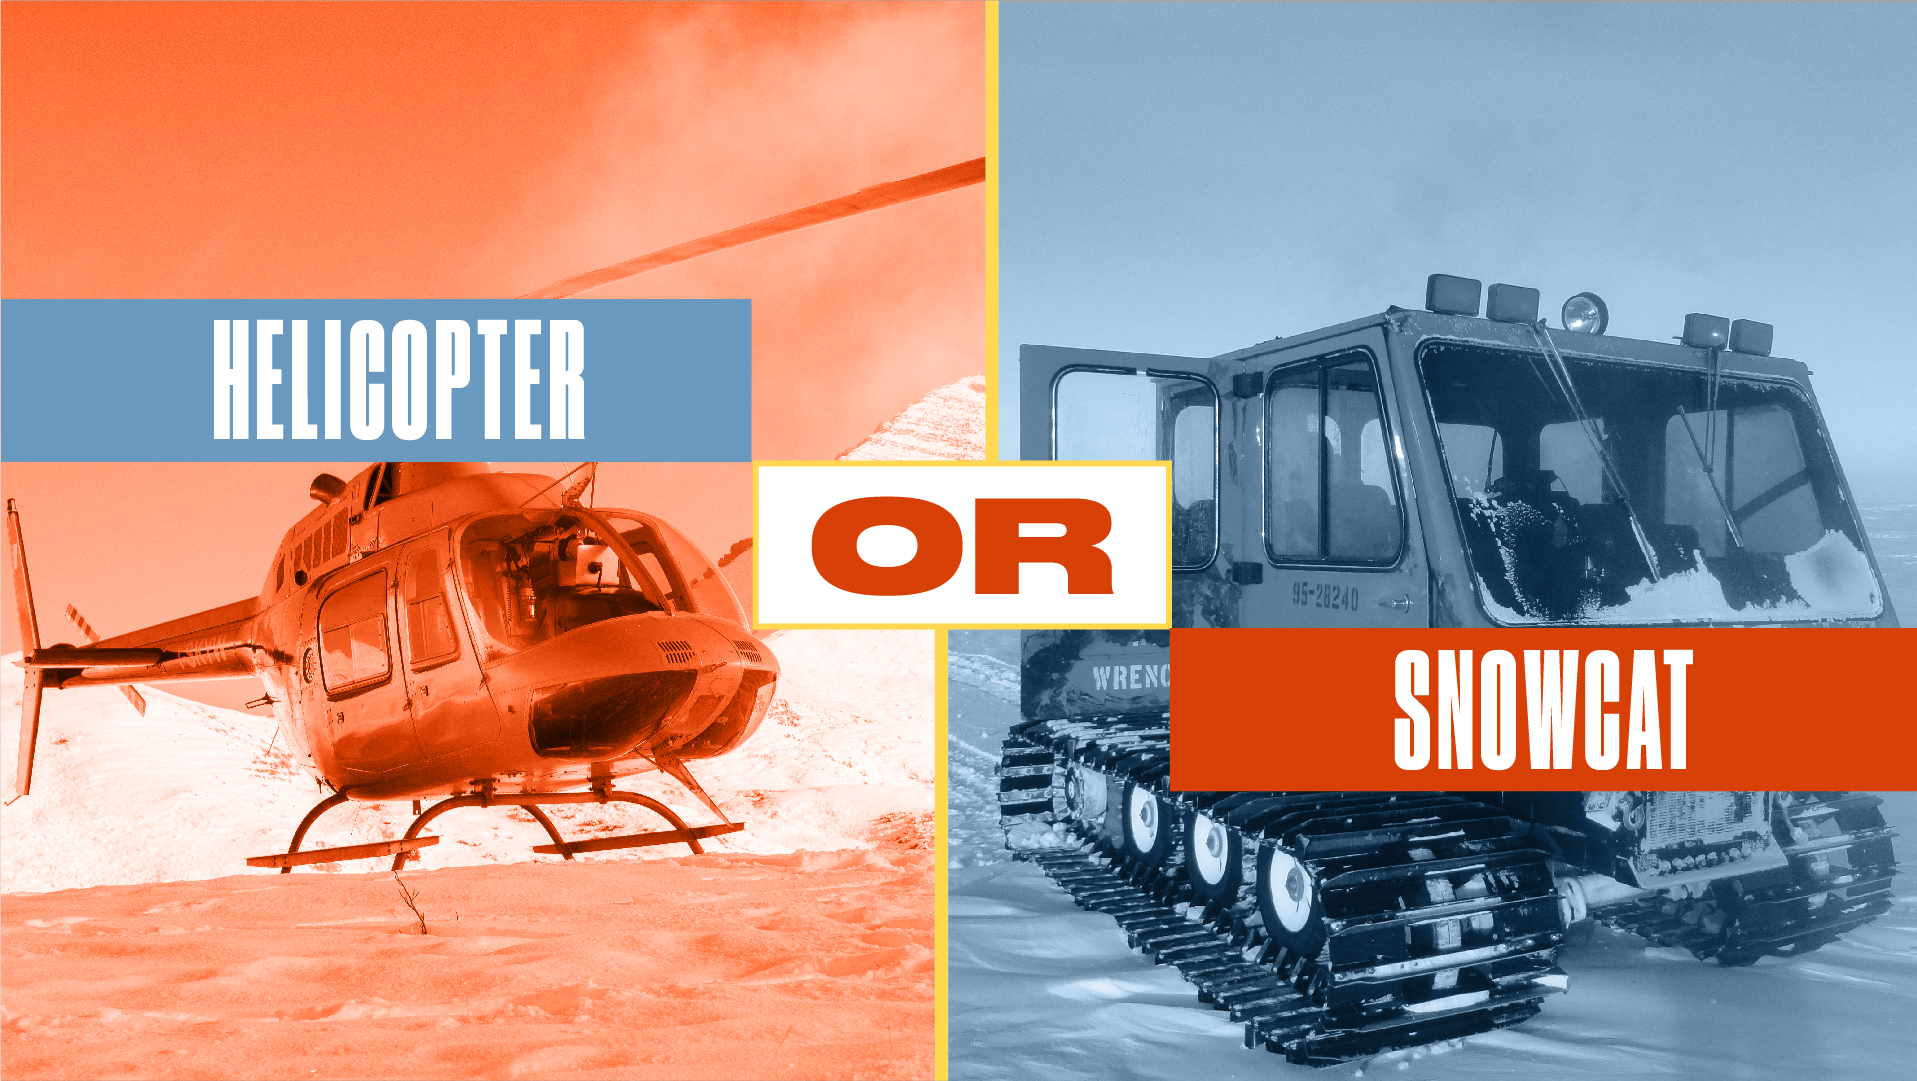 Either or Helicopter or Snowcat